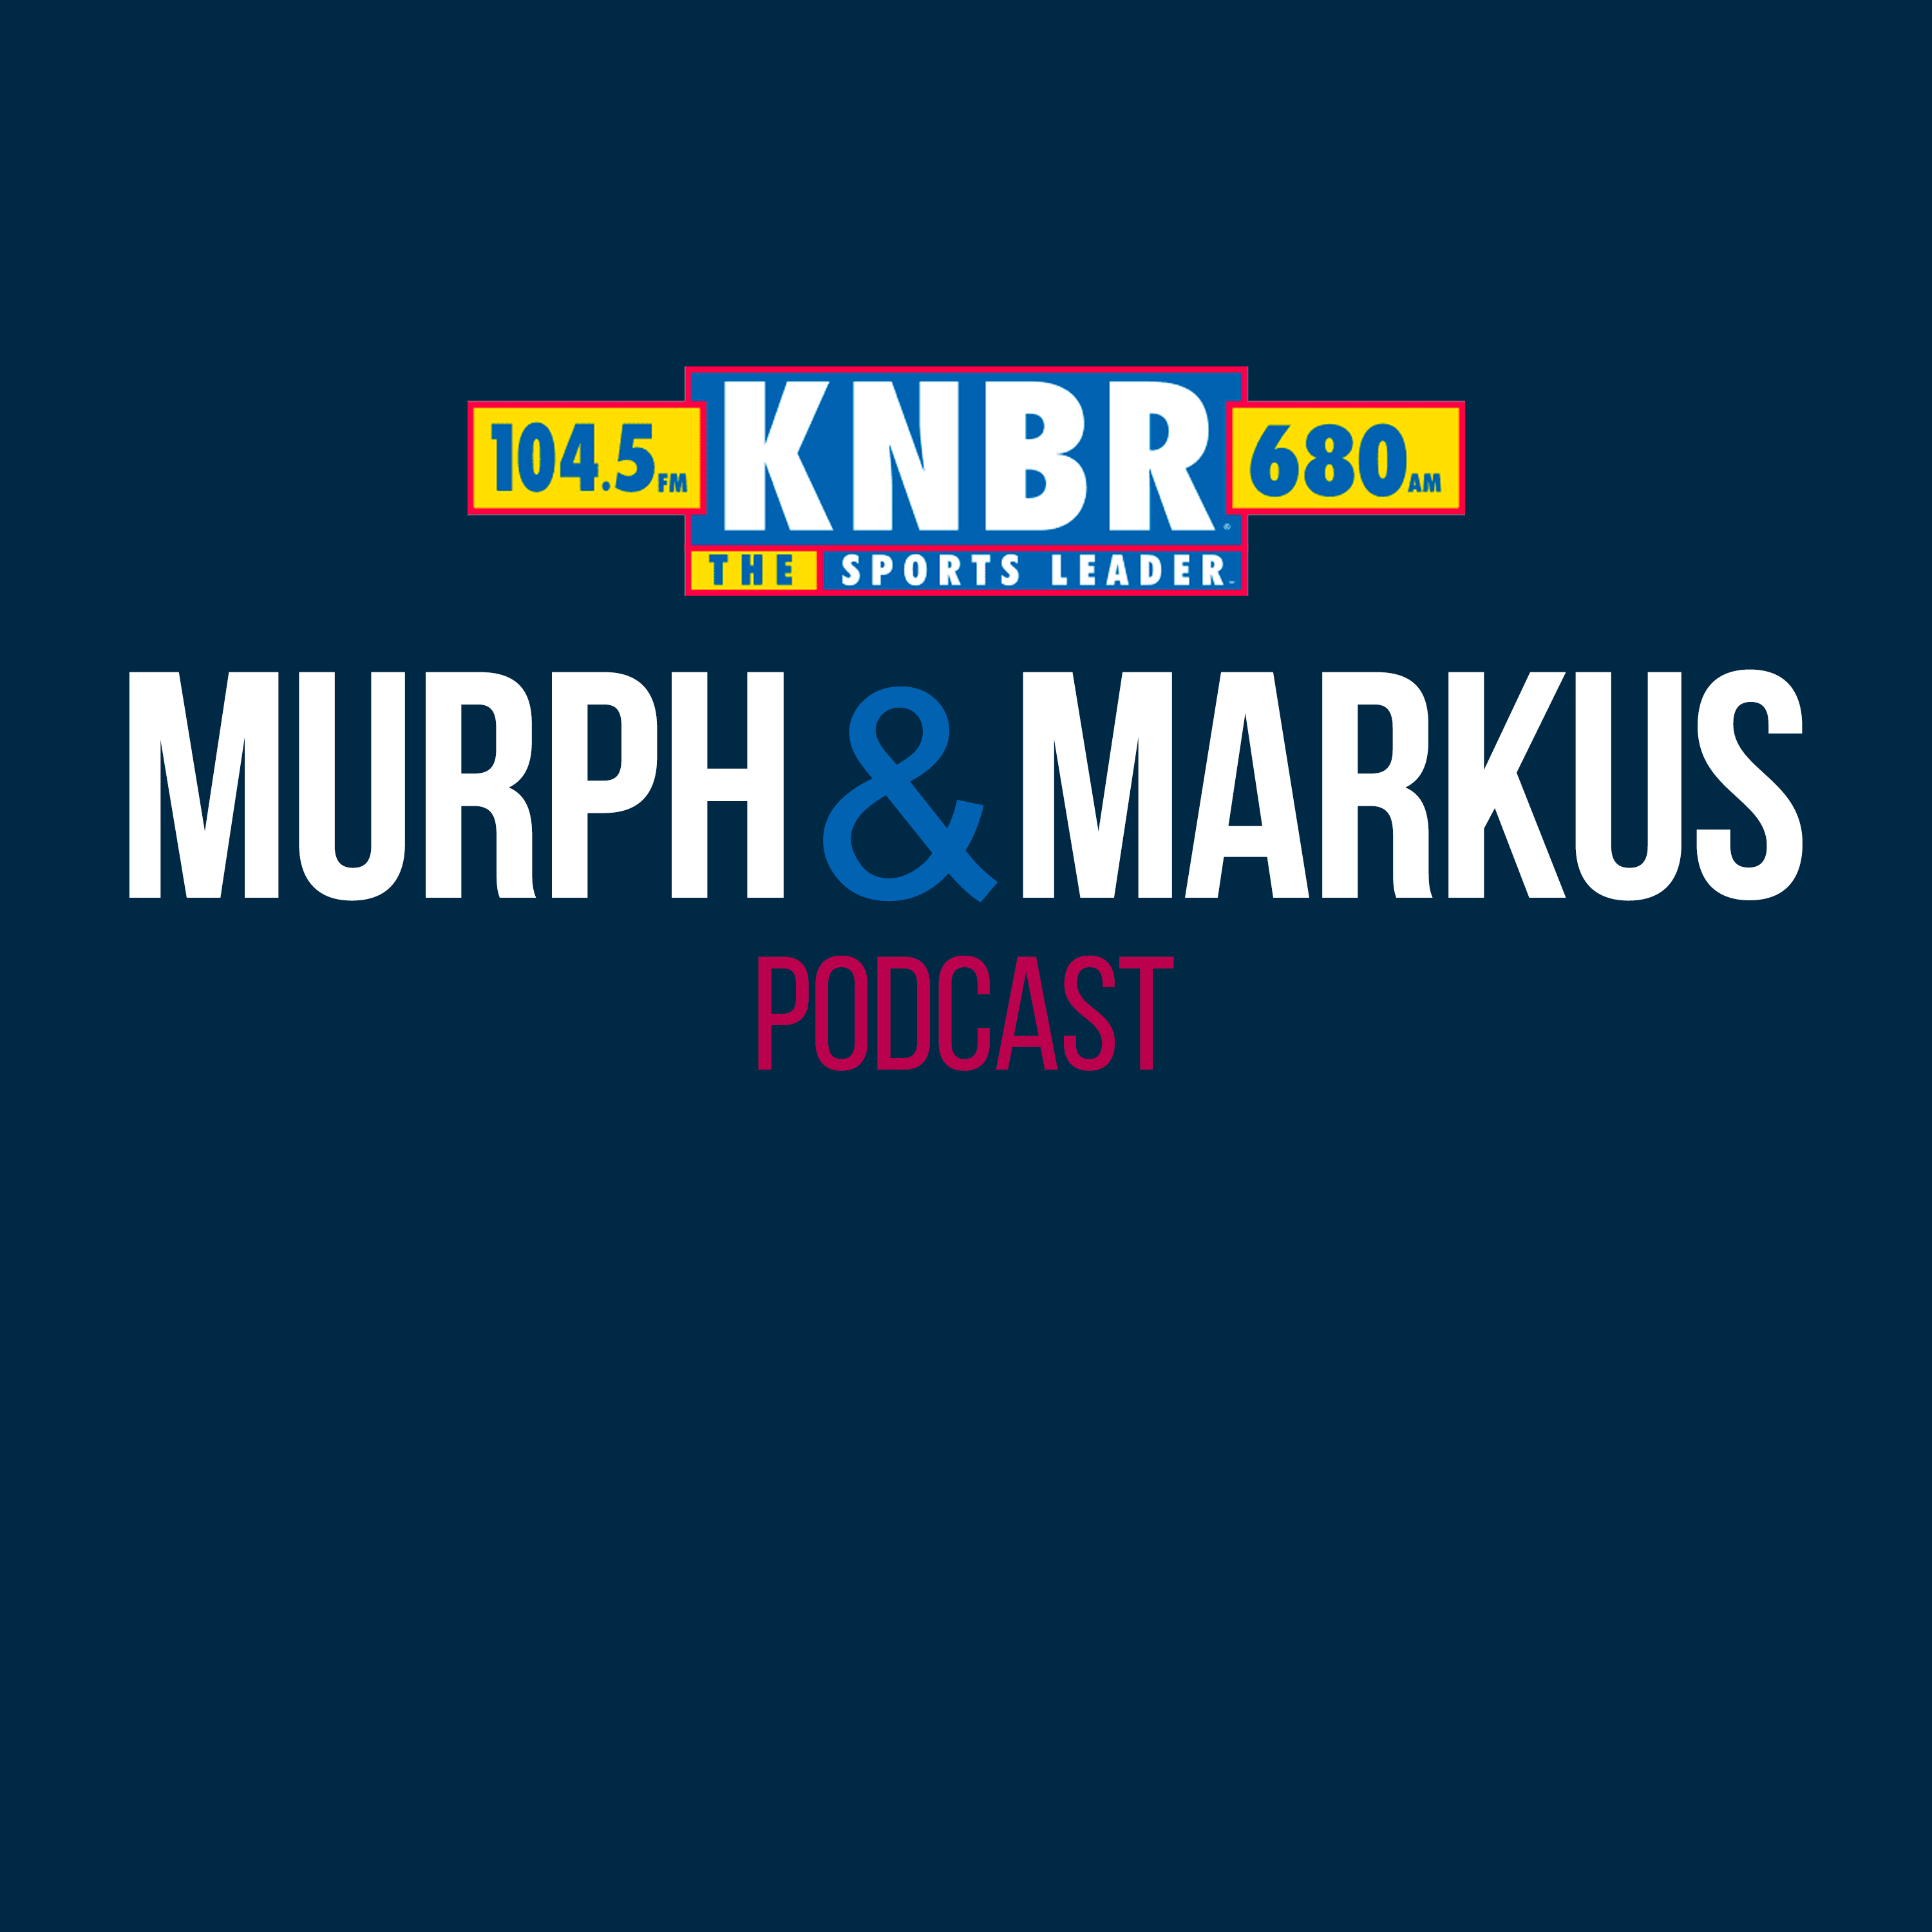 6-10 Hour 2: Murph & Markus discuss Keaton Winn's return to the Giants rotation, talk to Mike Krukow, and get into today's top story in the Big Hit